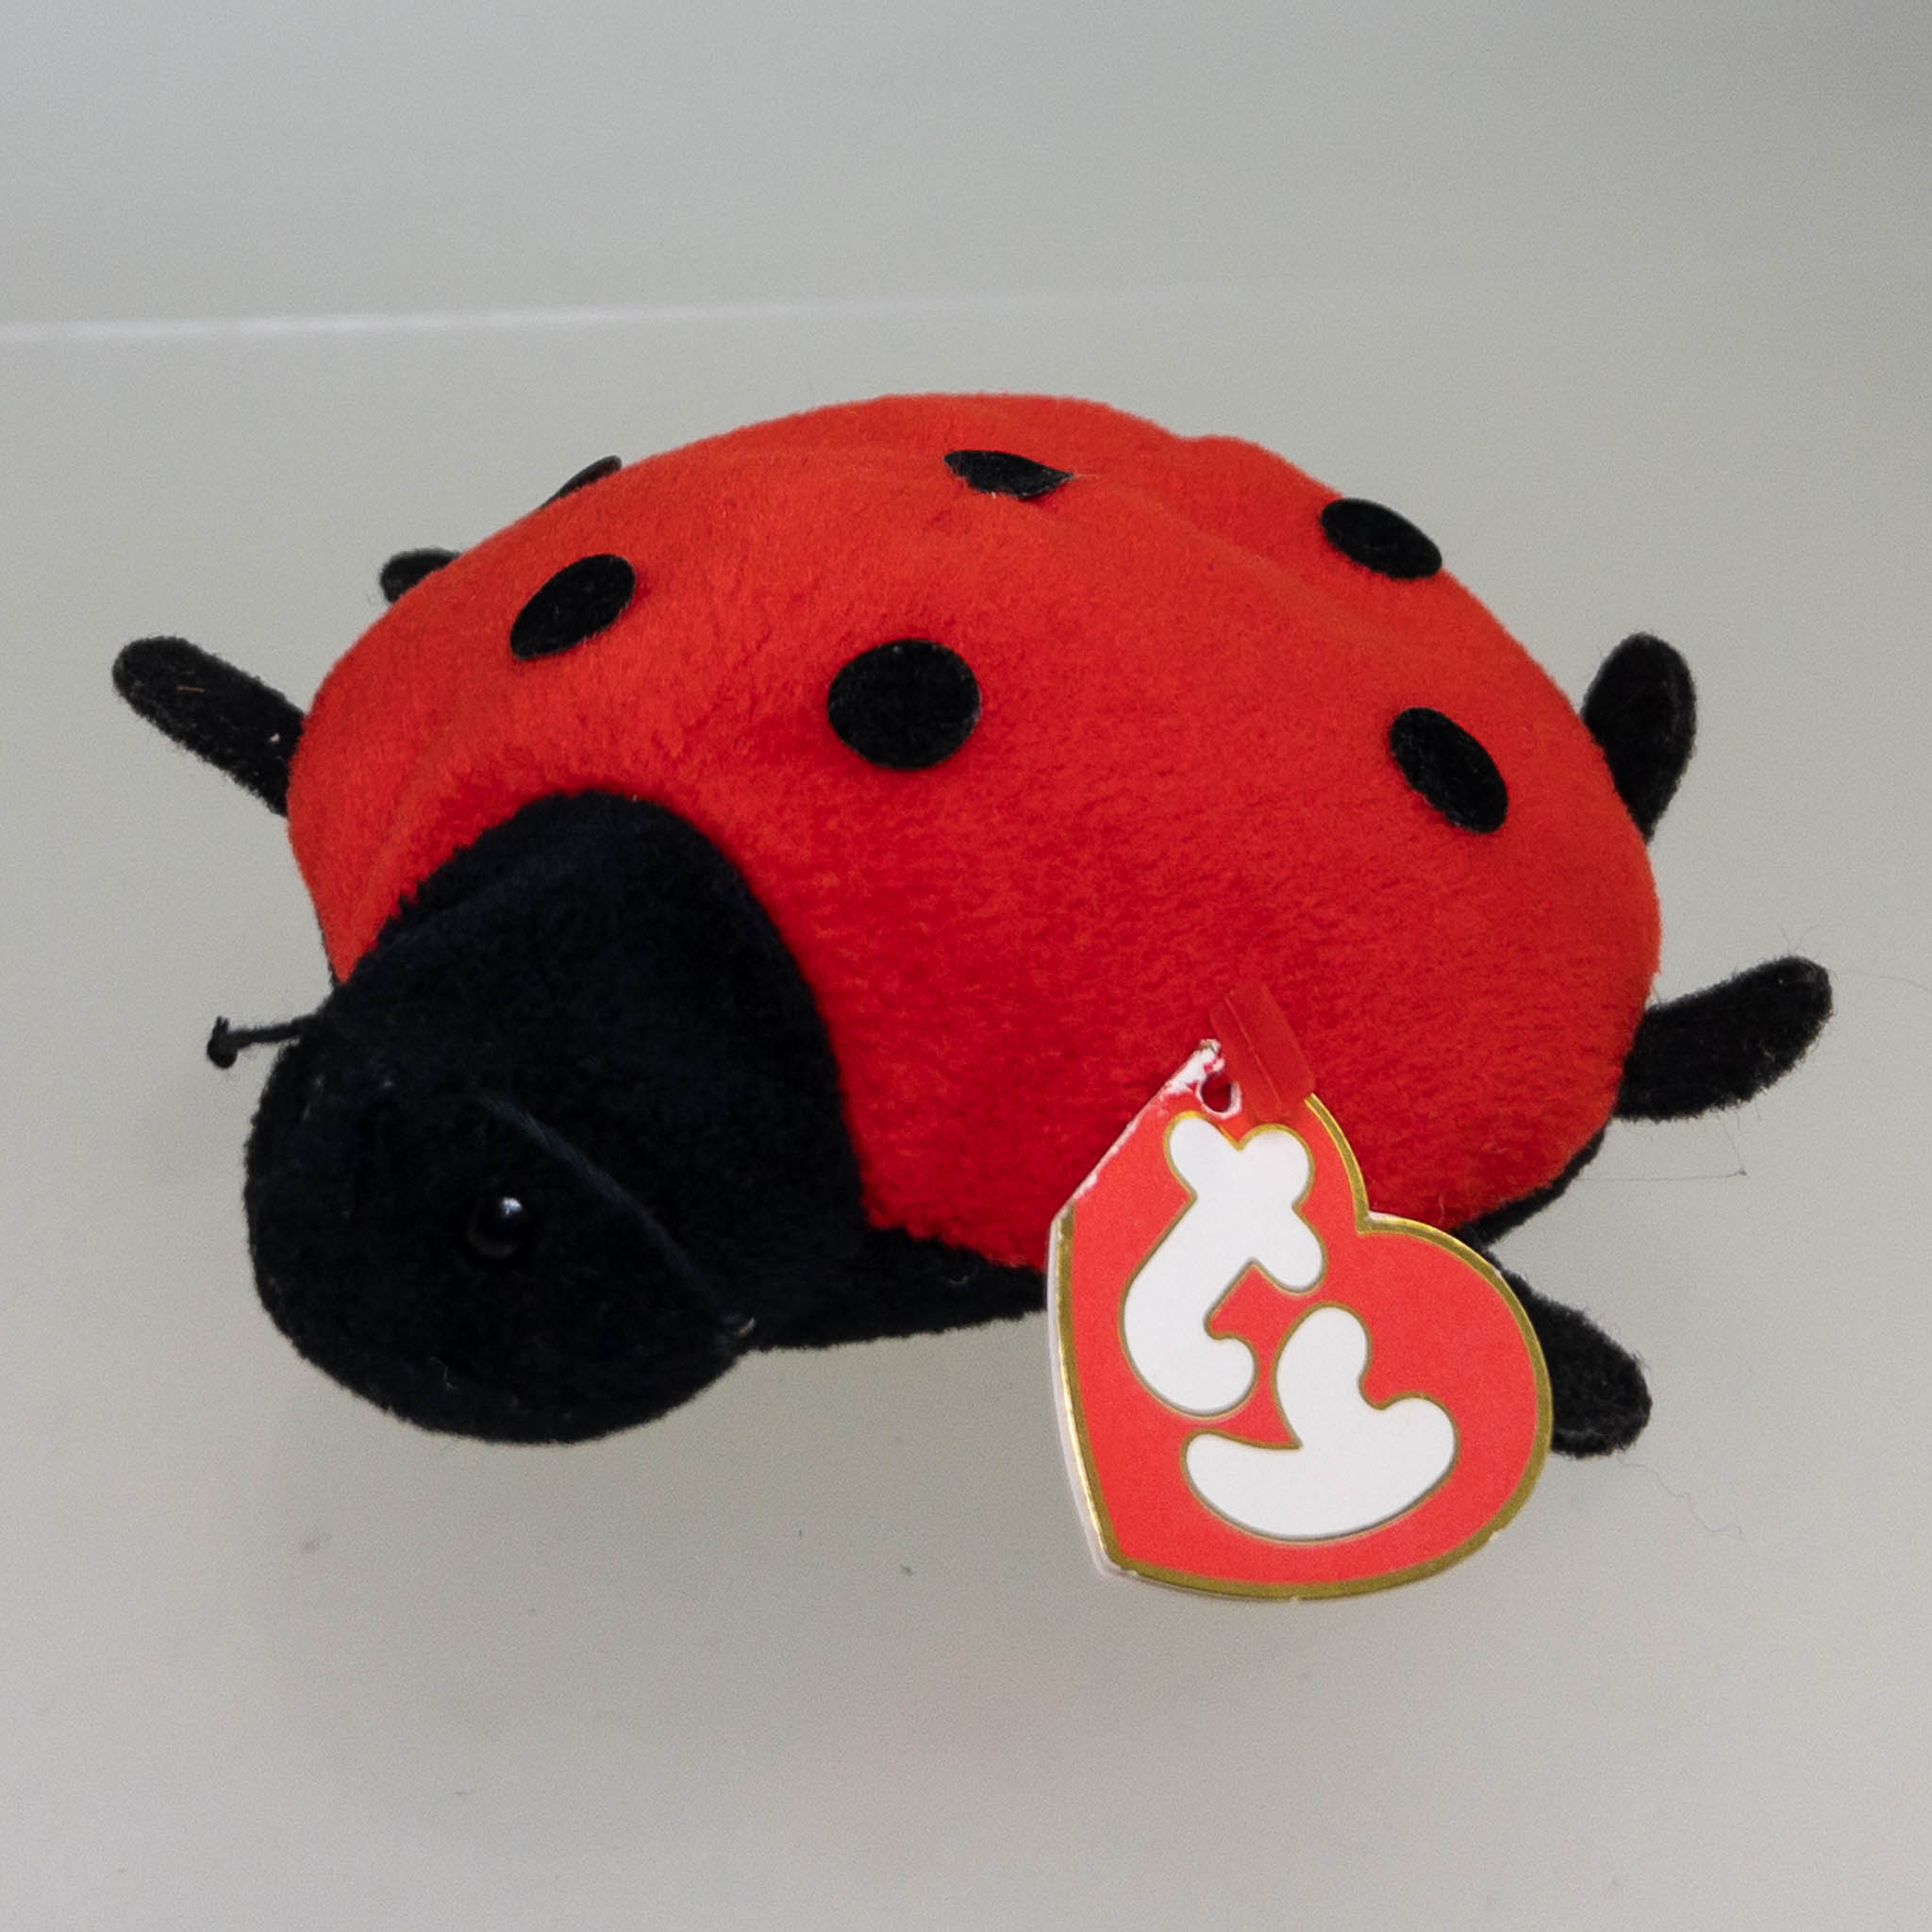 TY Beanie Baby - LUCKY the Ladybug (7 Felt Spots) (3rd Gen Hang Tag - MWNMTs)